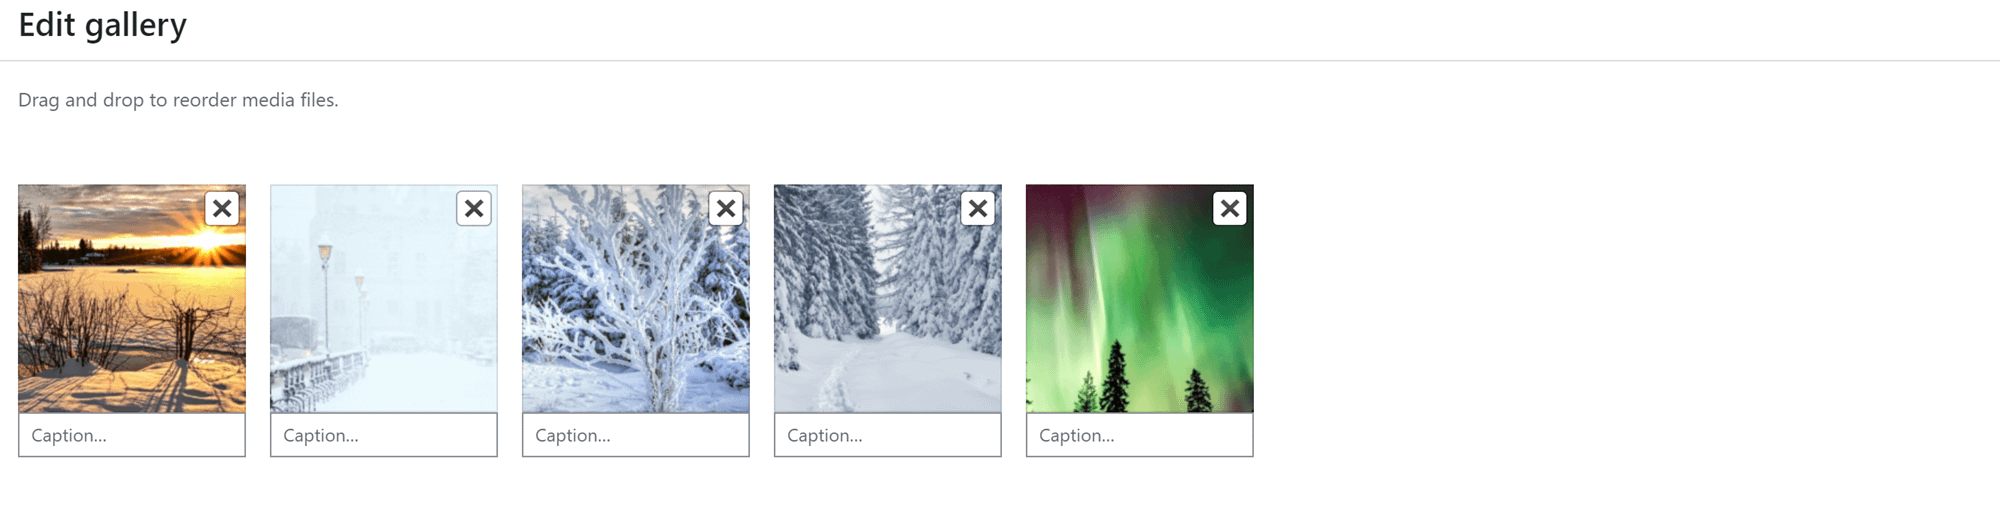 How to create a gallery in WordPress: adding captions in the Media Library